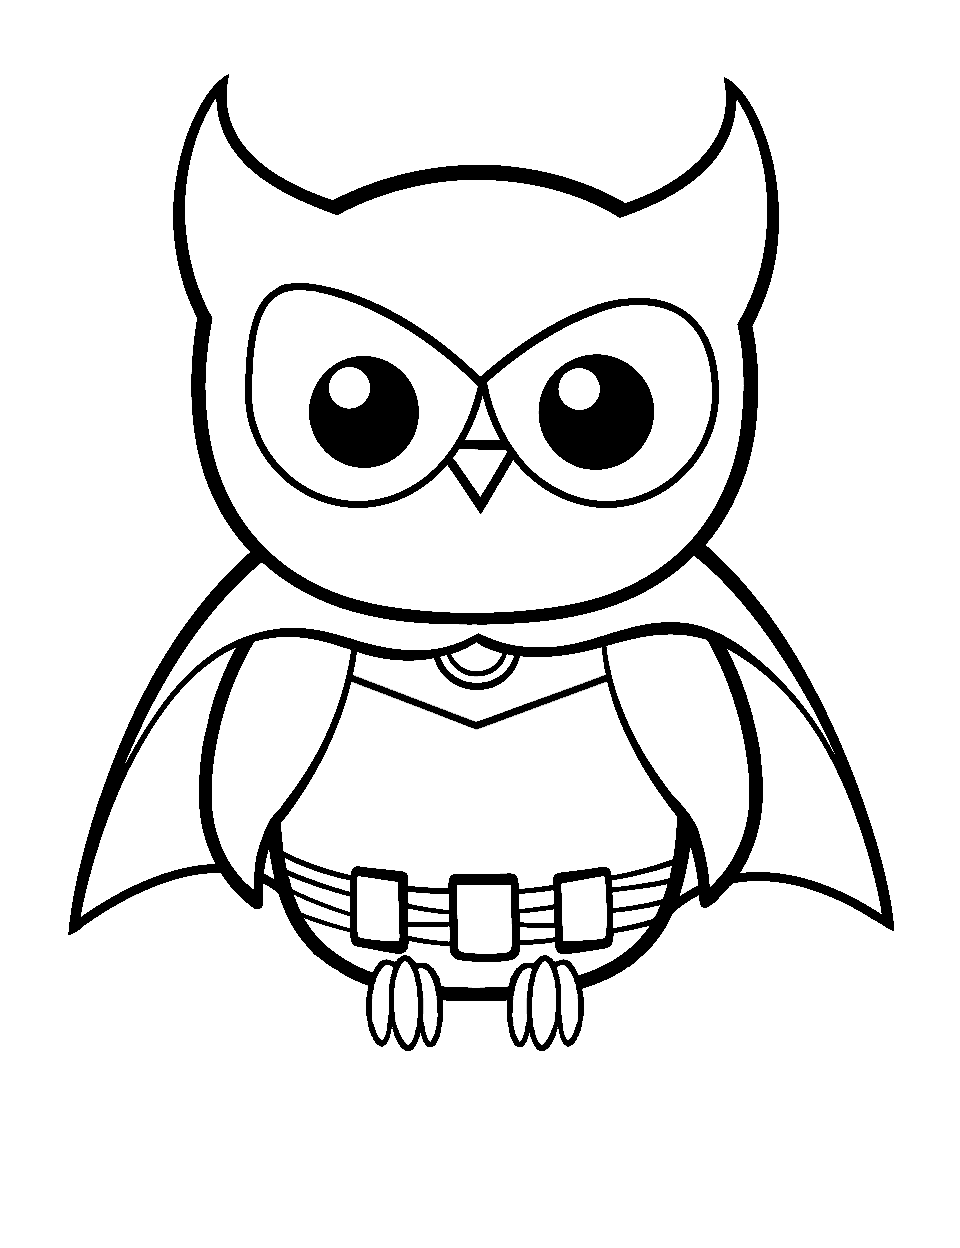 Superhero Owl Coloring Page - An owl dressed in a superhero costume with a cape.